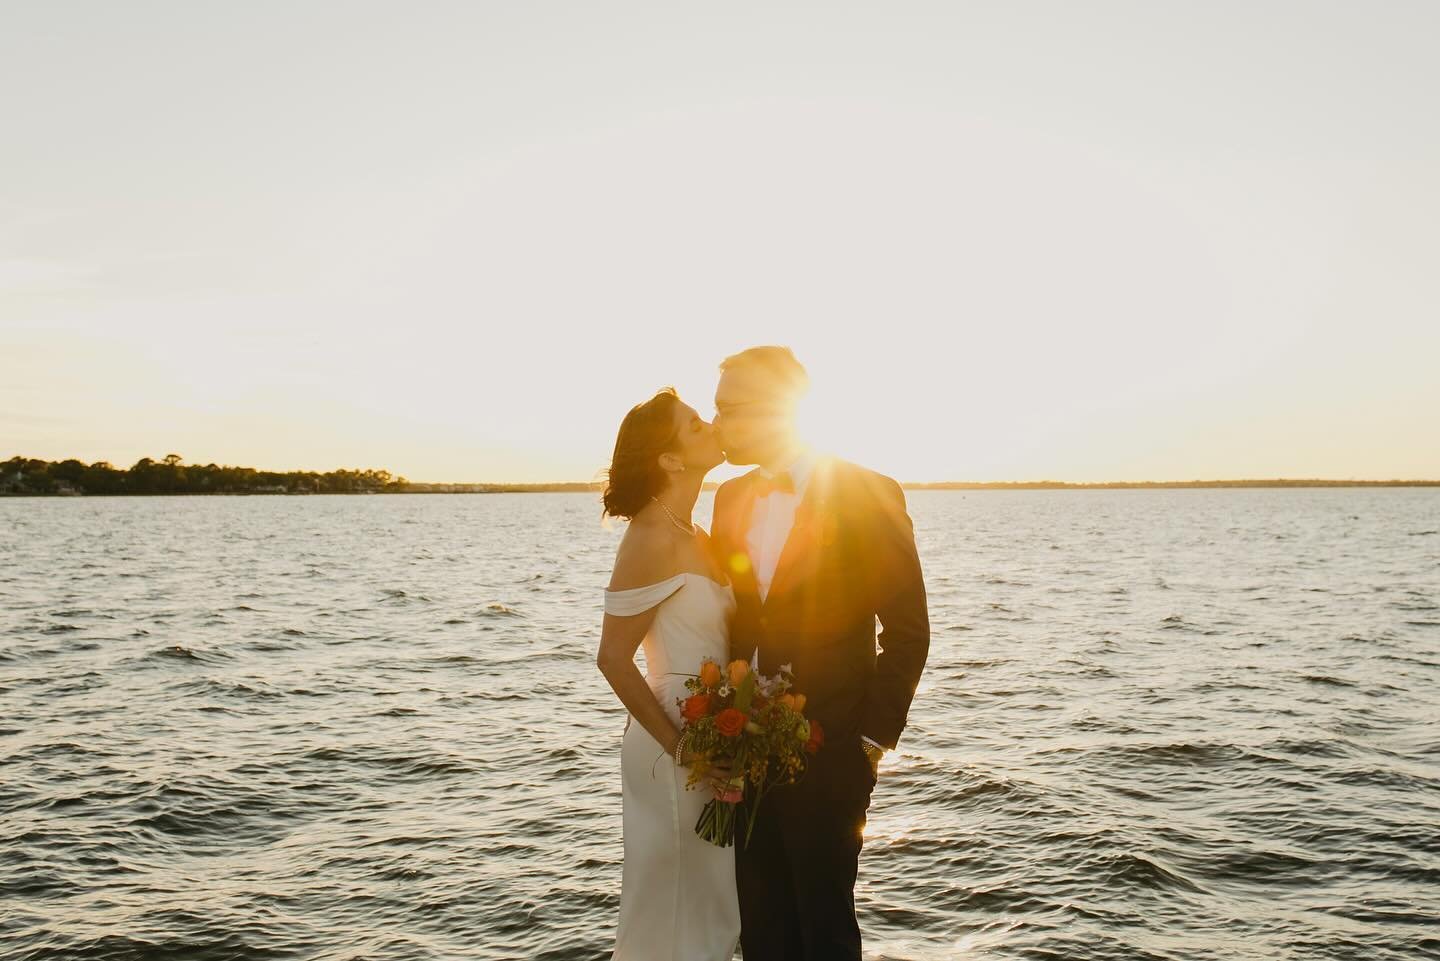 They eloped in his parent&rsquo;s backyard with their pup, Sully and their closest family + friends. Then they shared snacks, laughter and drinks together on the back porch. And we ended the night catching the roaring sunset at the yacht club around 